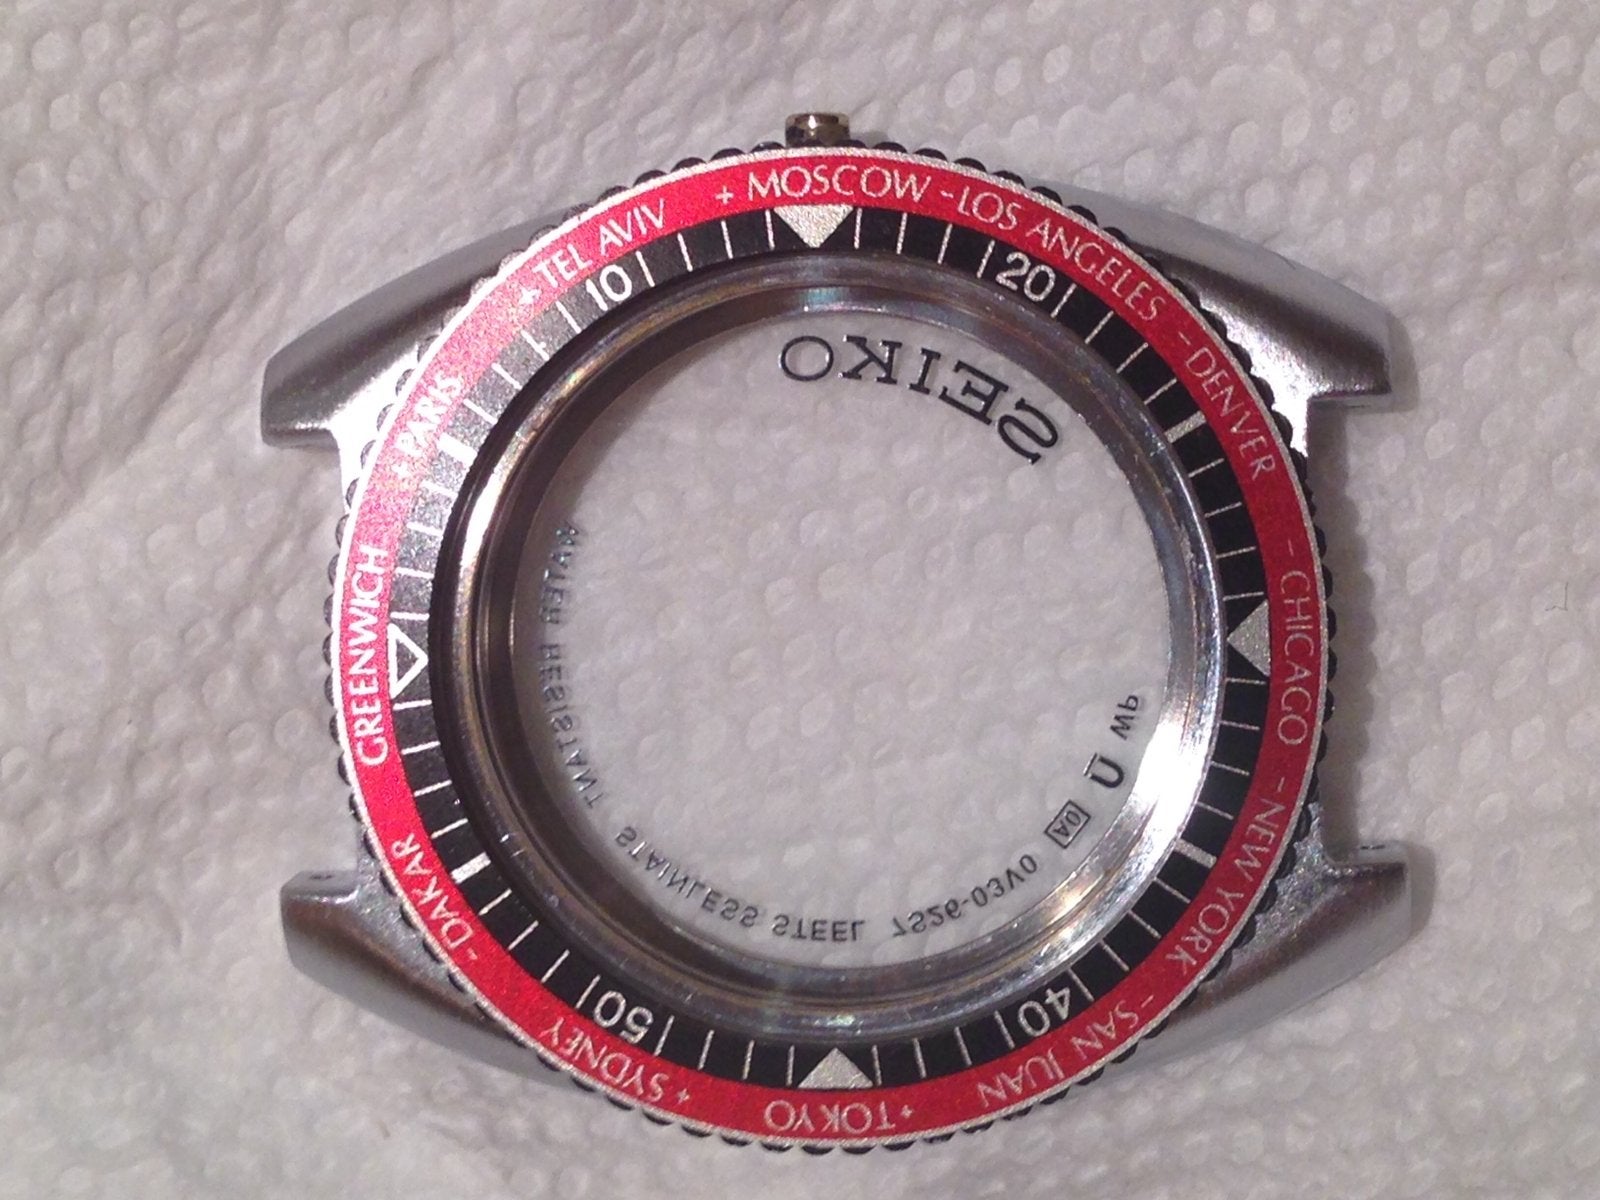 How to Remove Seiko Ink/Markings inside Hardlex Case Back ? | The Watch Site